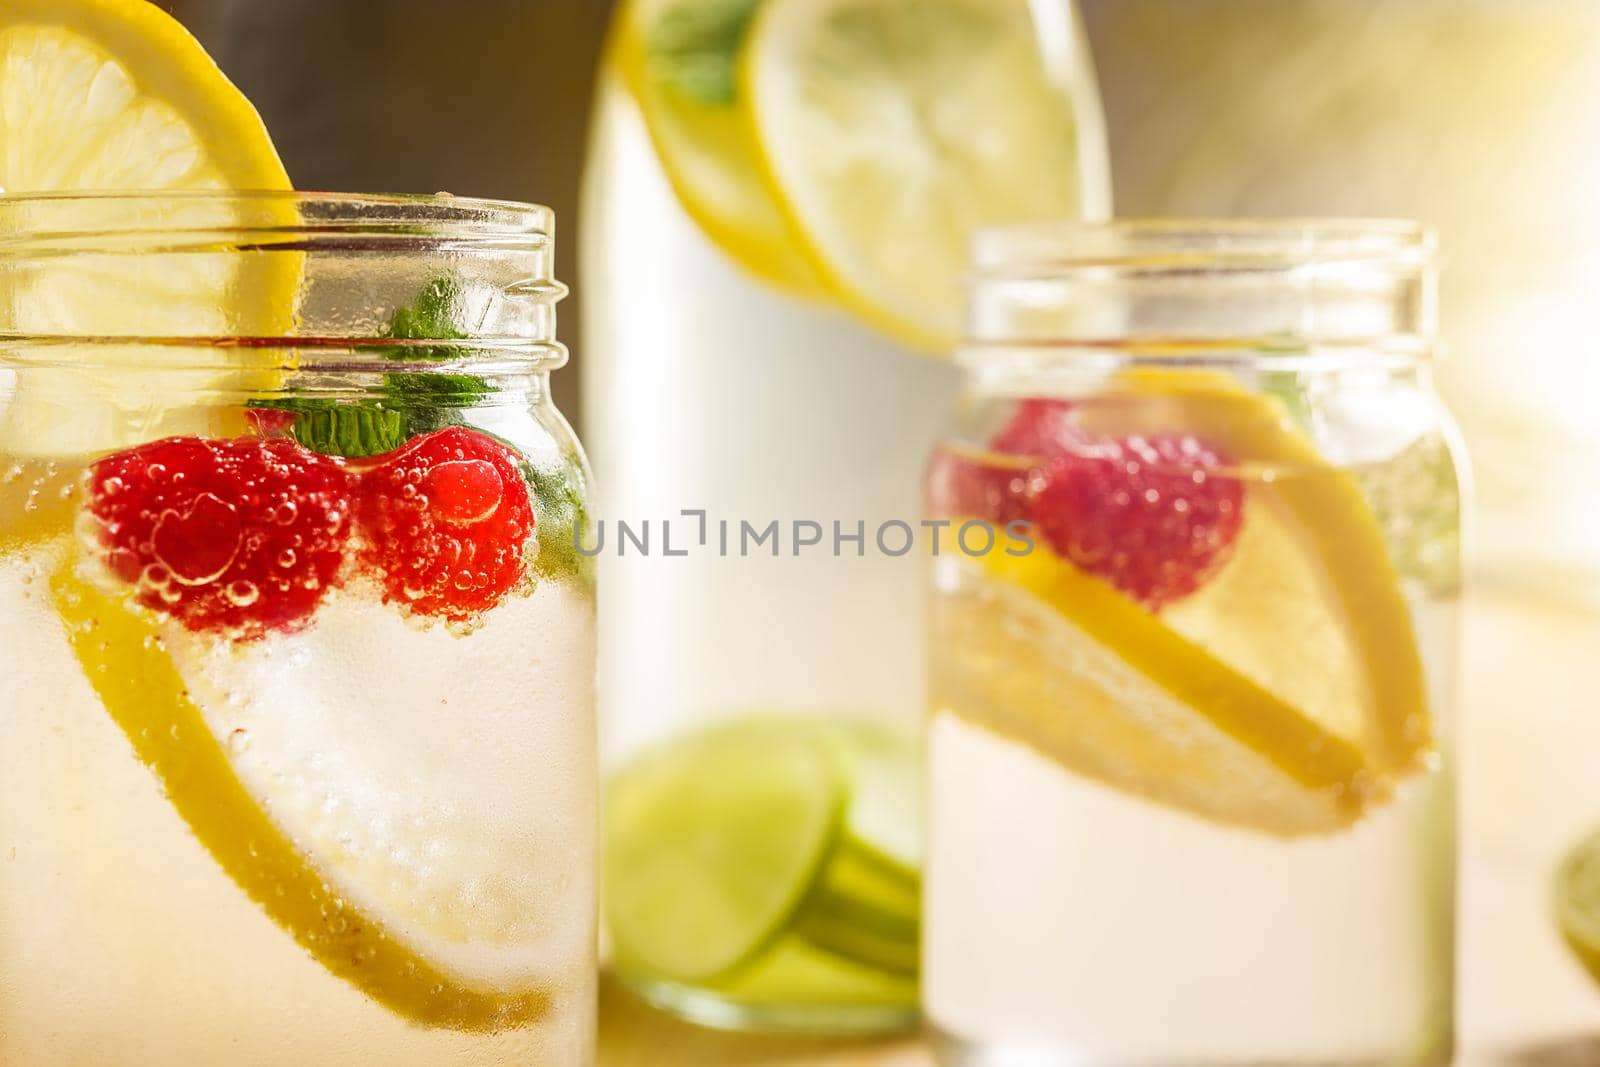 Two glass jars with refreshing cold water, lemon slices, red berries, lime and mint and a bottle with citrus pieces illuminated by sunlight. Summer refreshment background. copy space